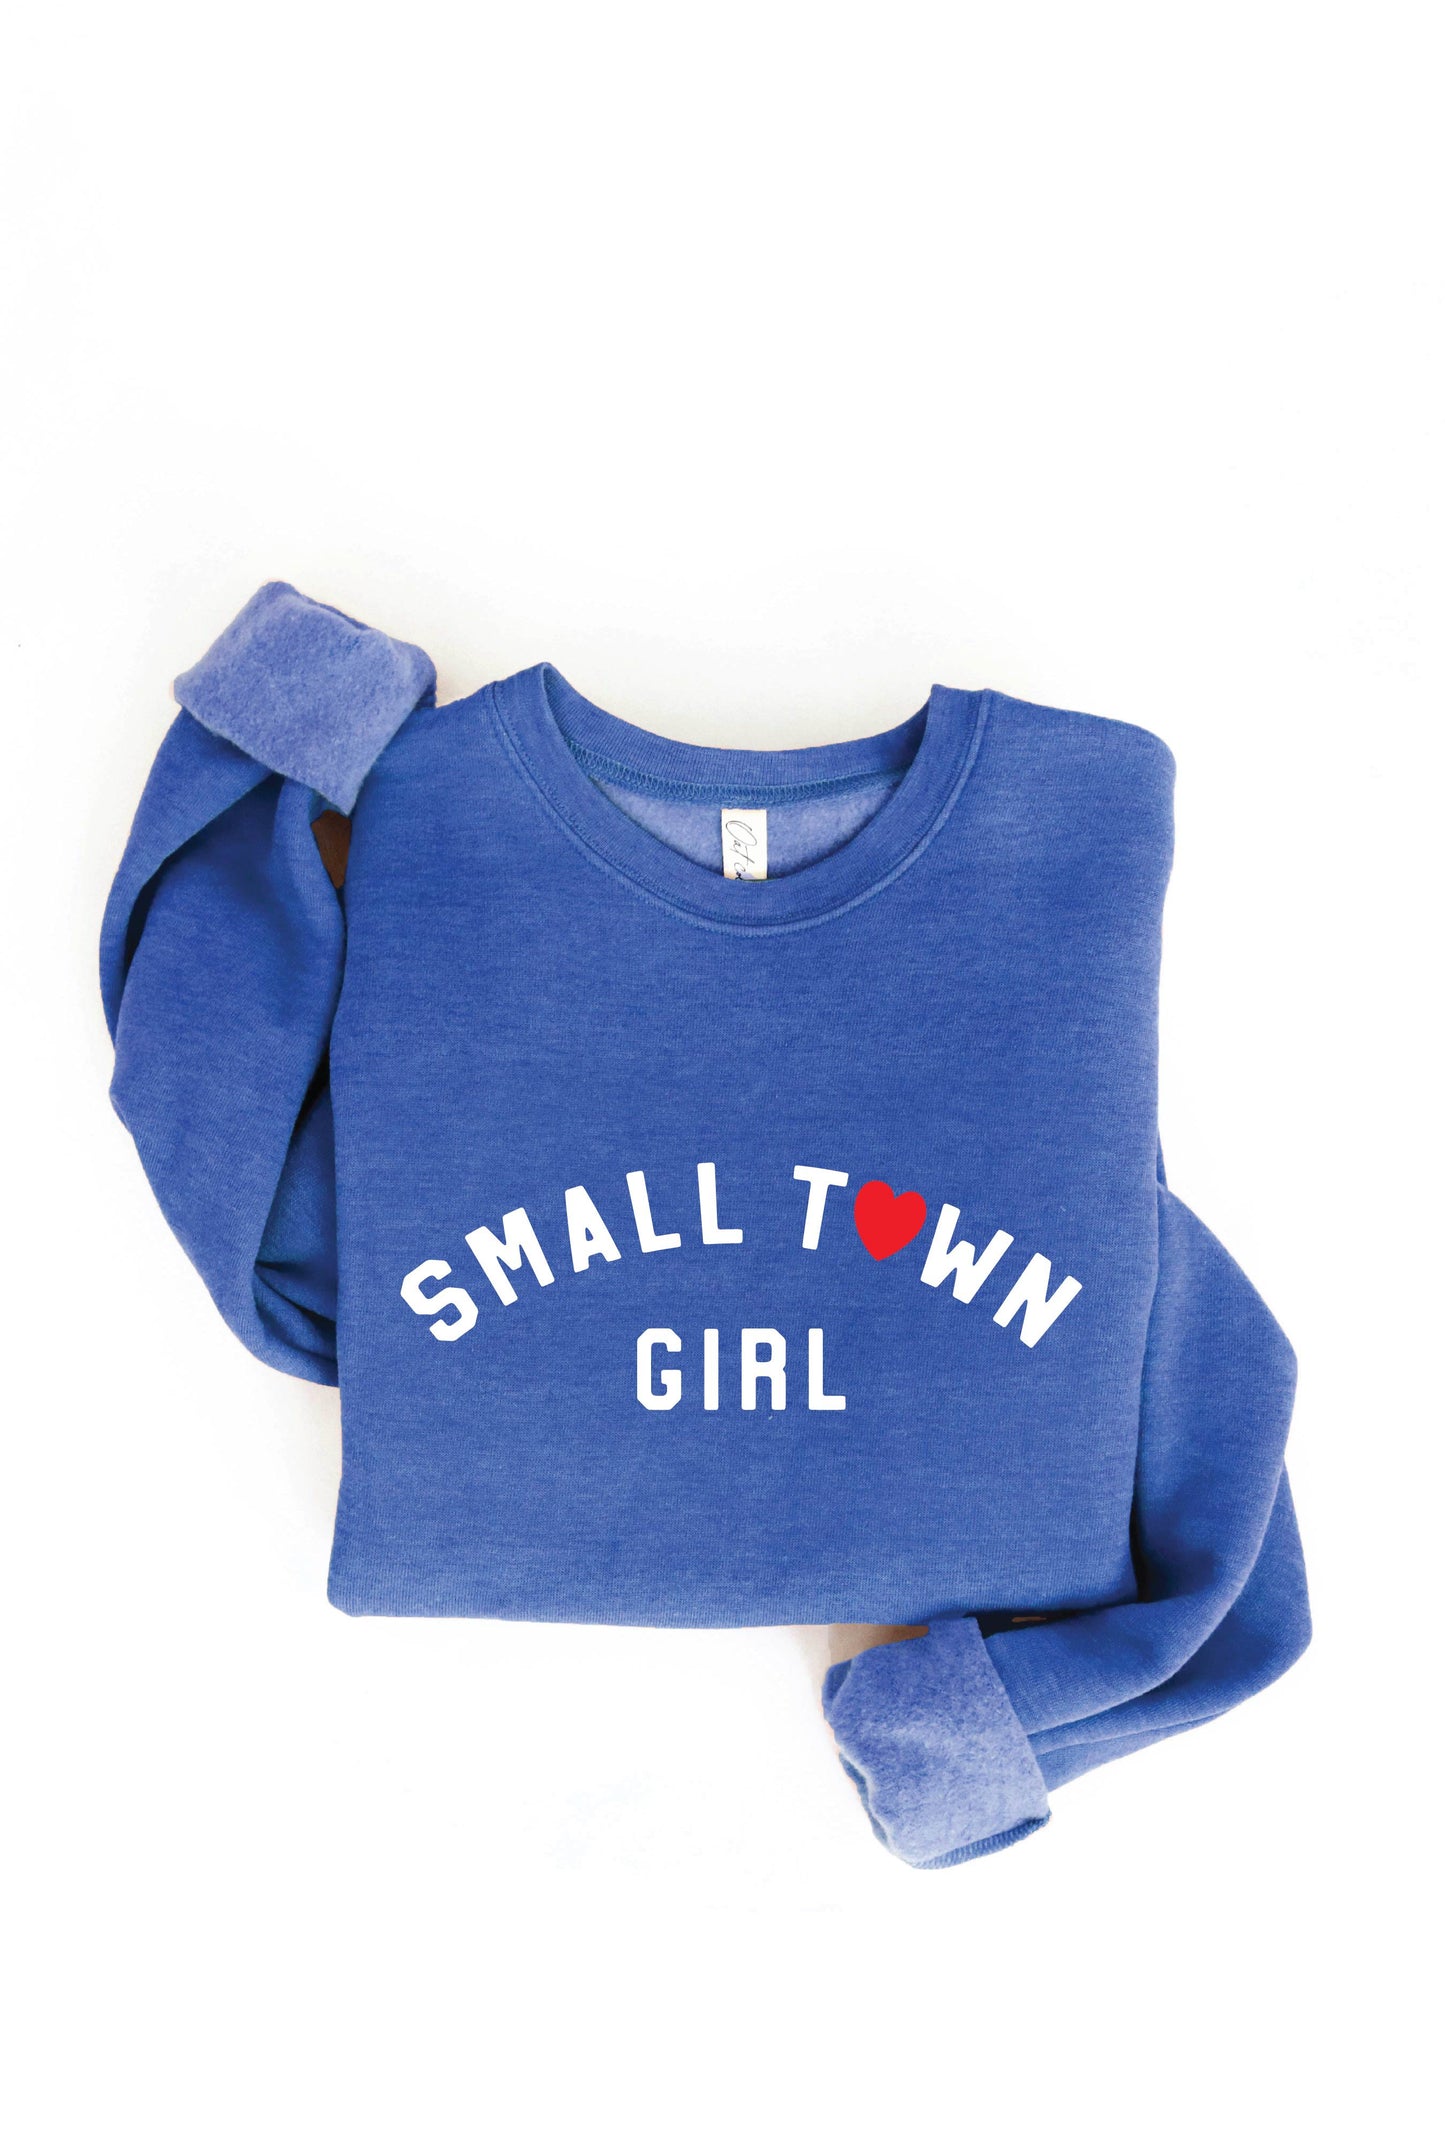 Oat Collective Small Town Girl Graphic